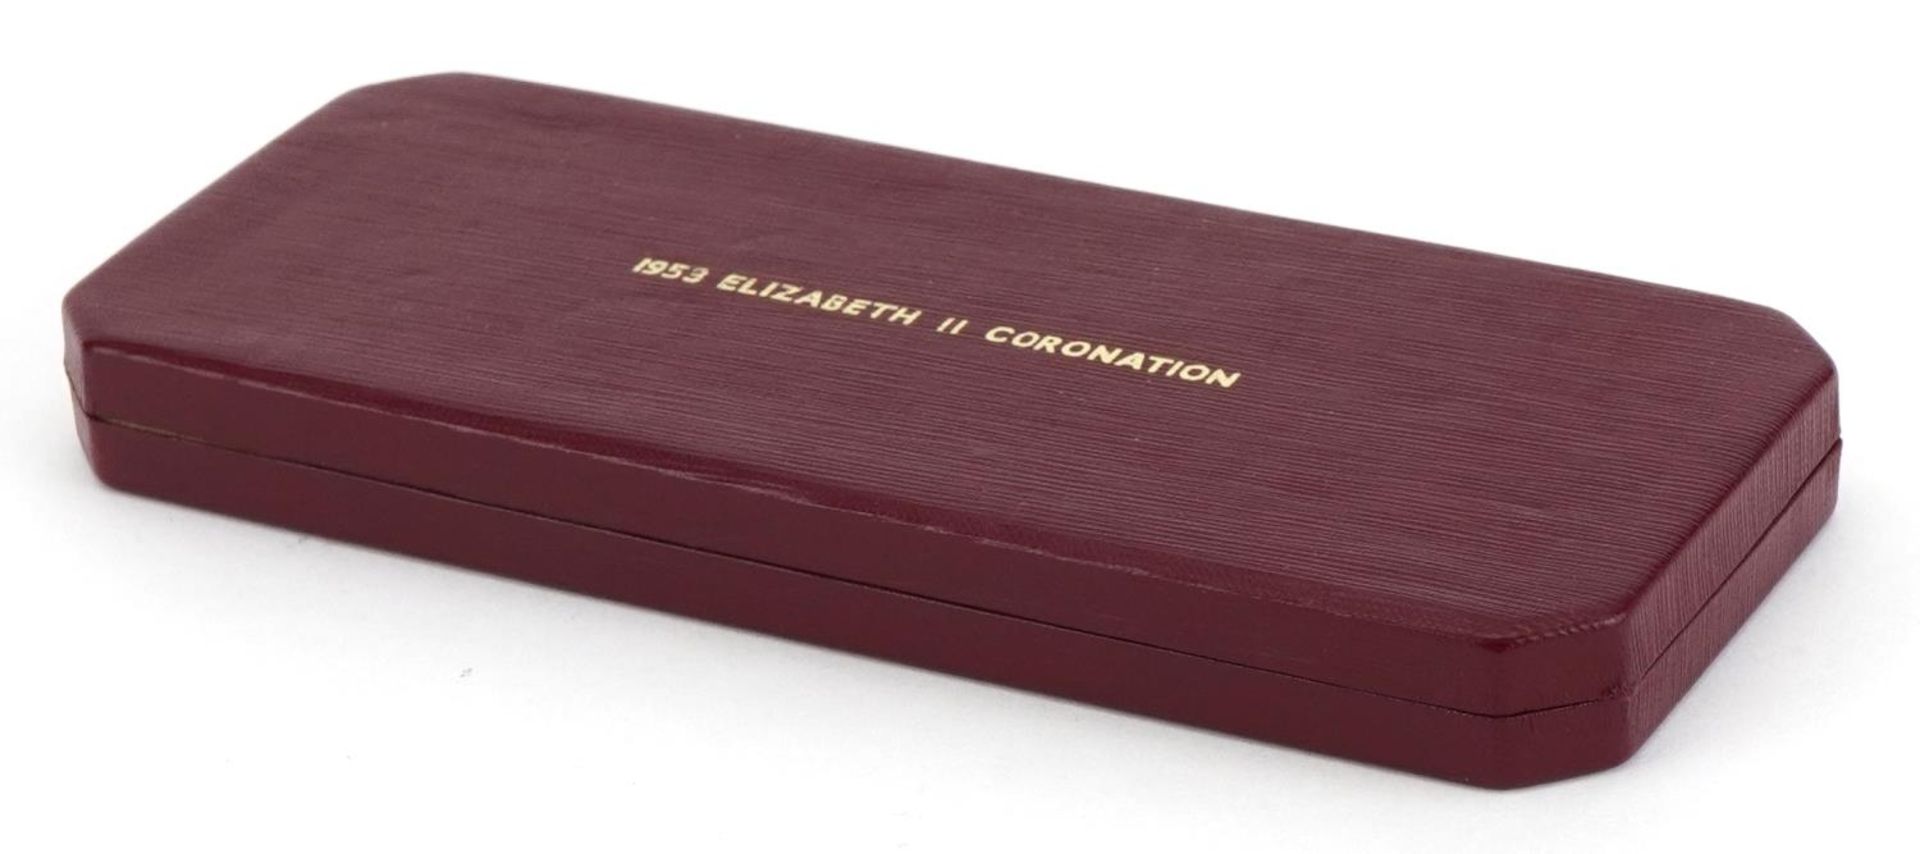 Elizabeth II 1953 Coronation specimen coin set housed in a fitted case - Image 3 of 3